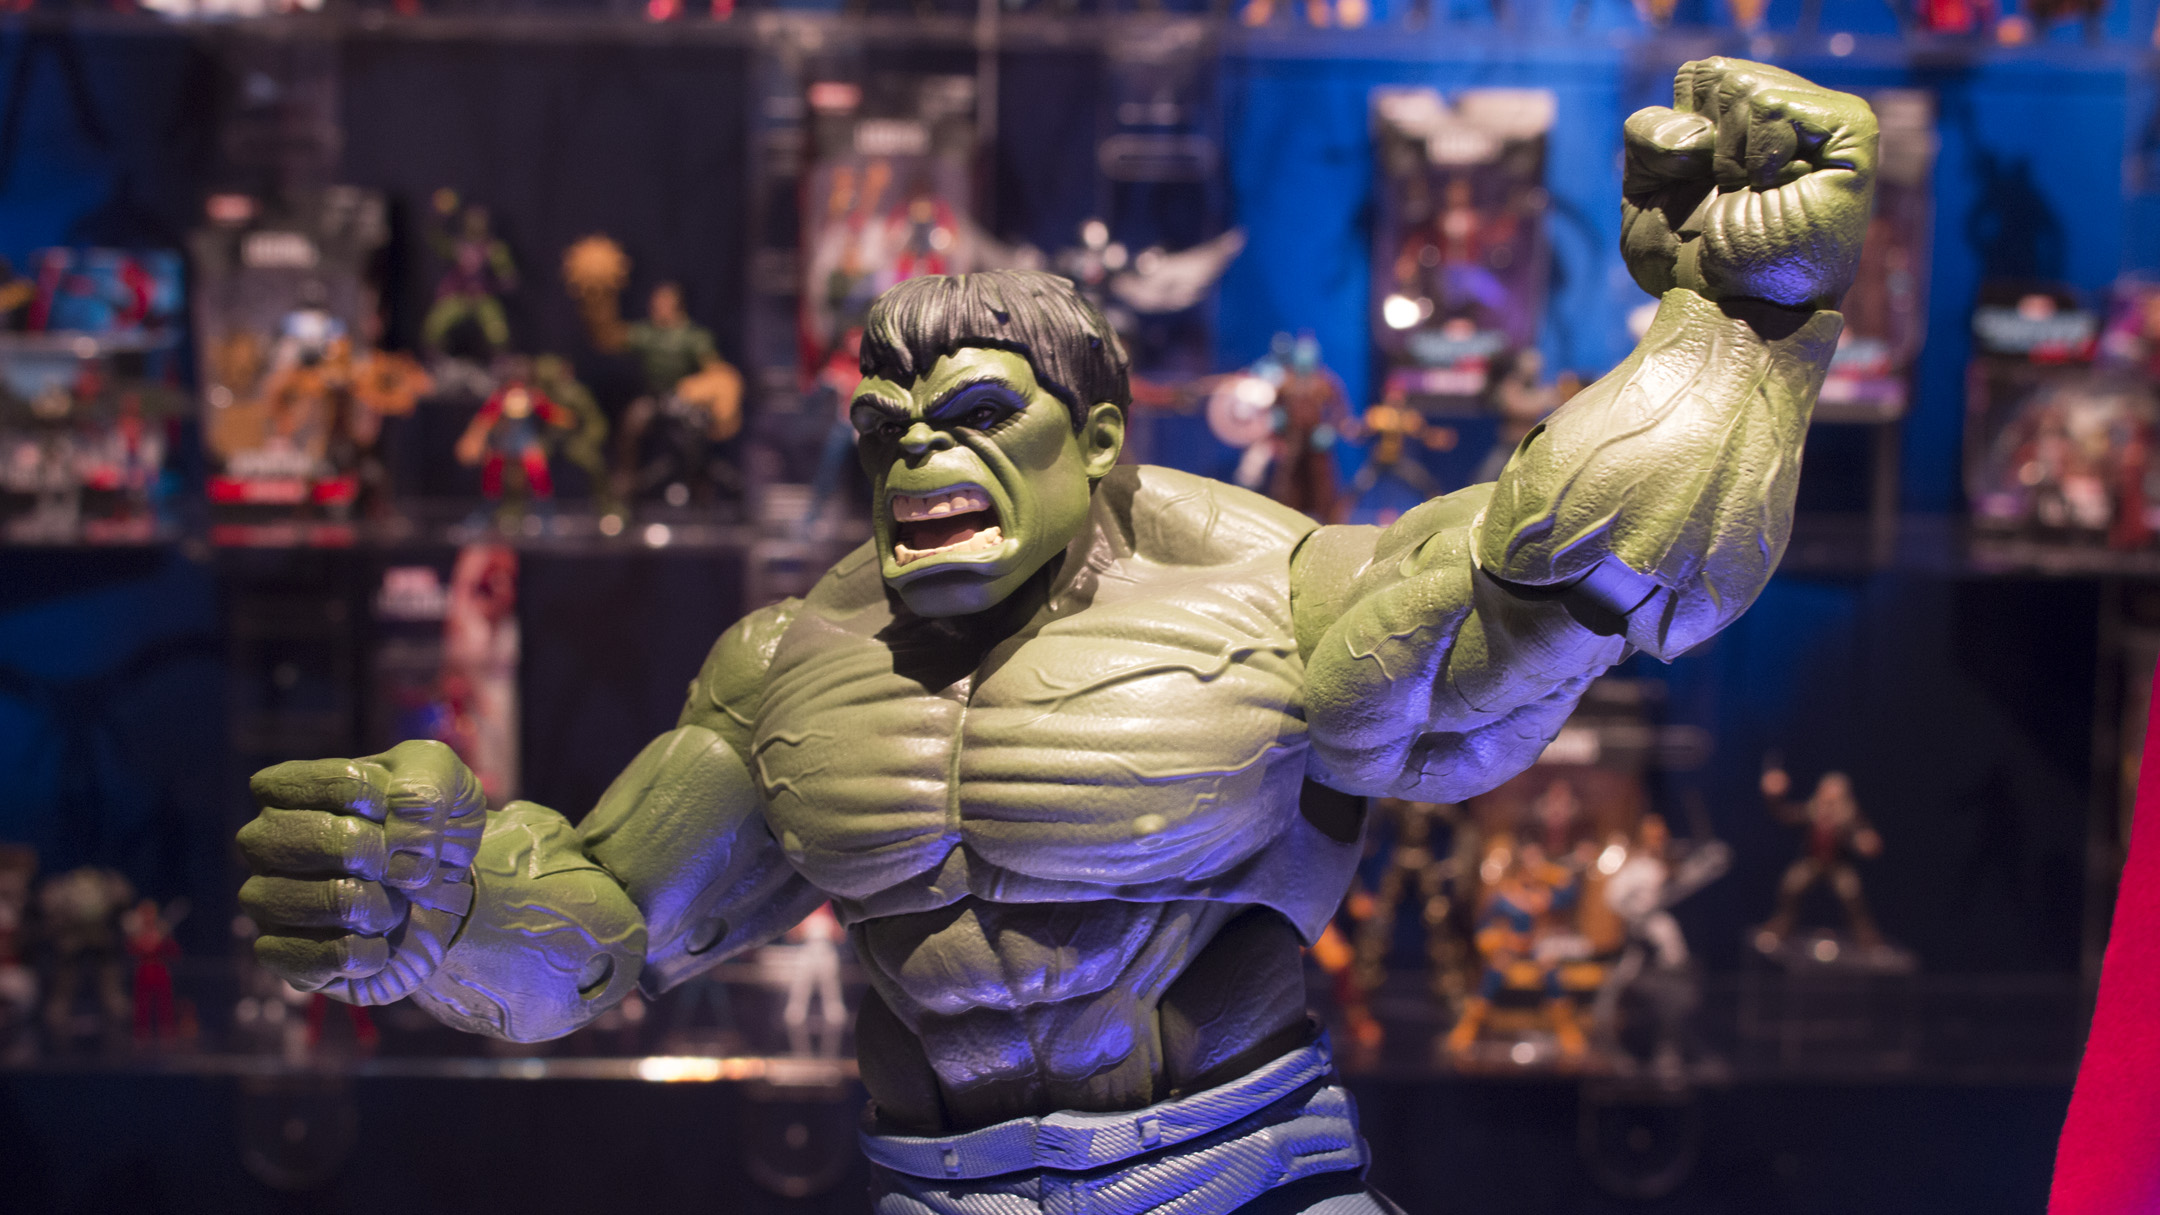 My Favourite Images From Toy Fair 2017 Day Two